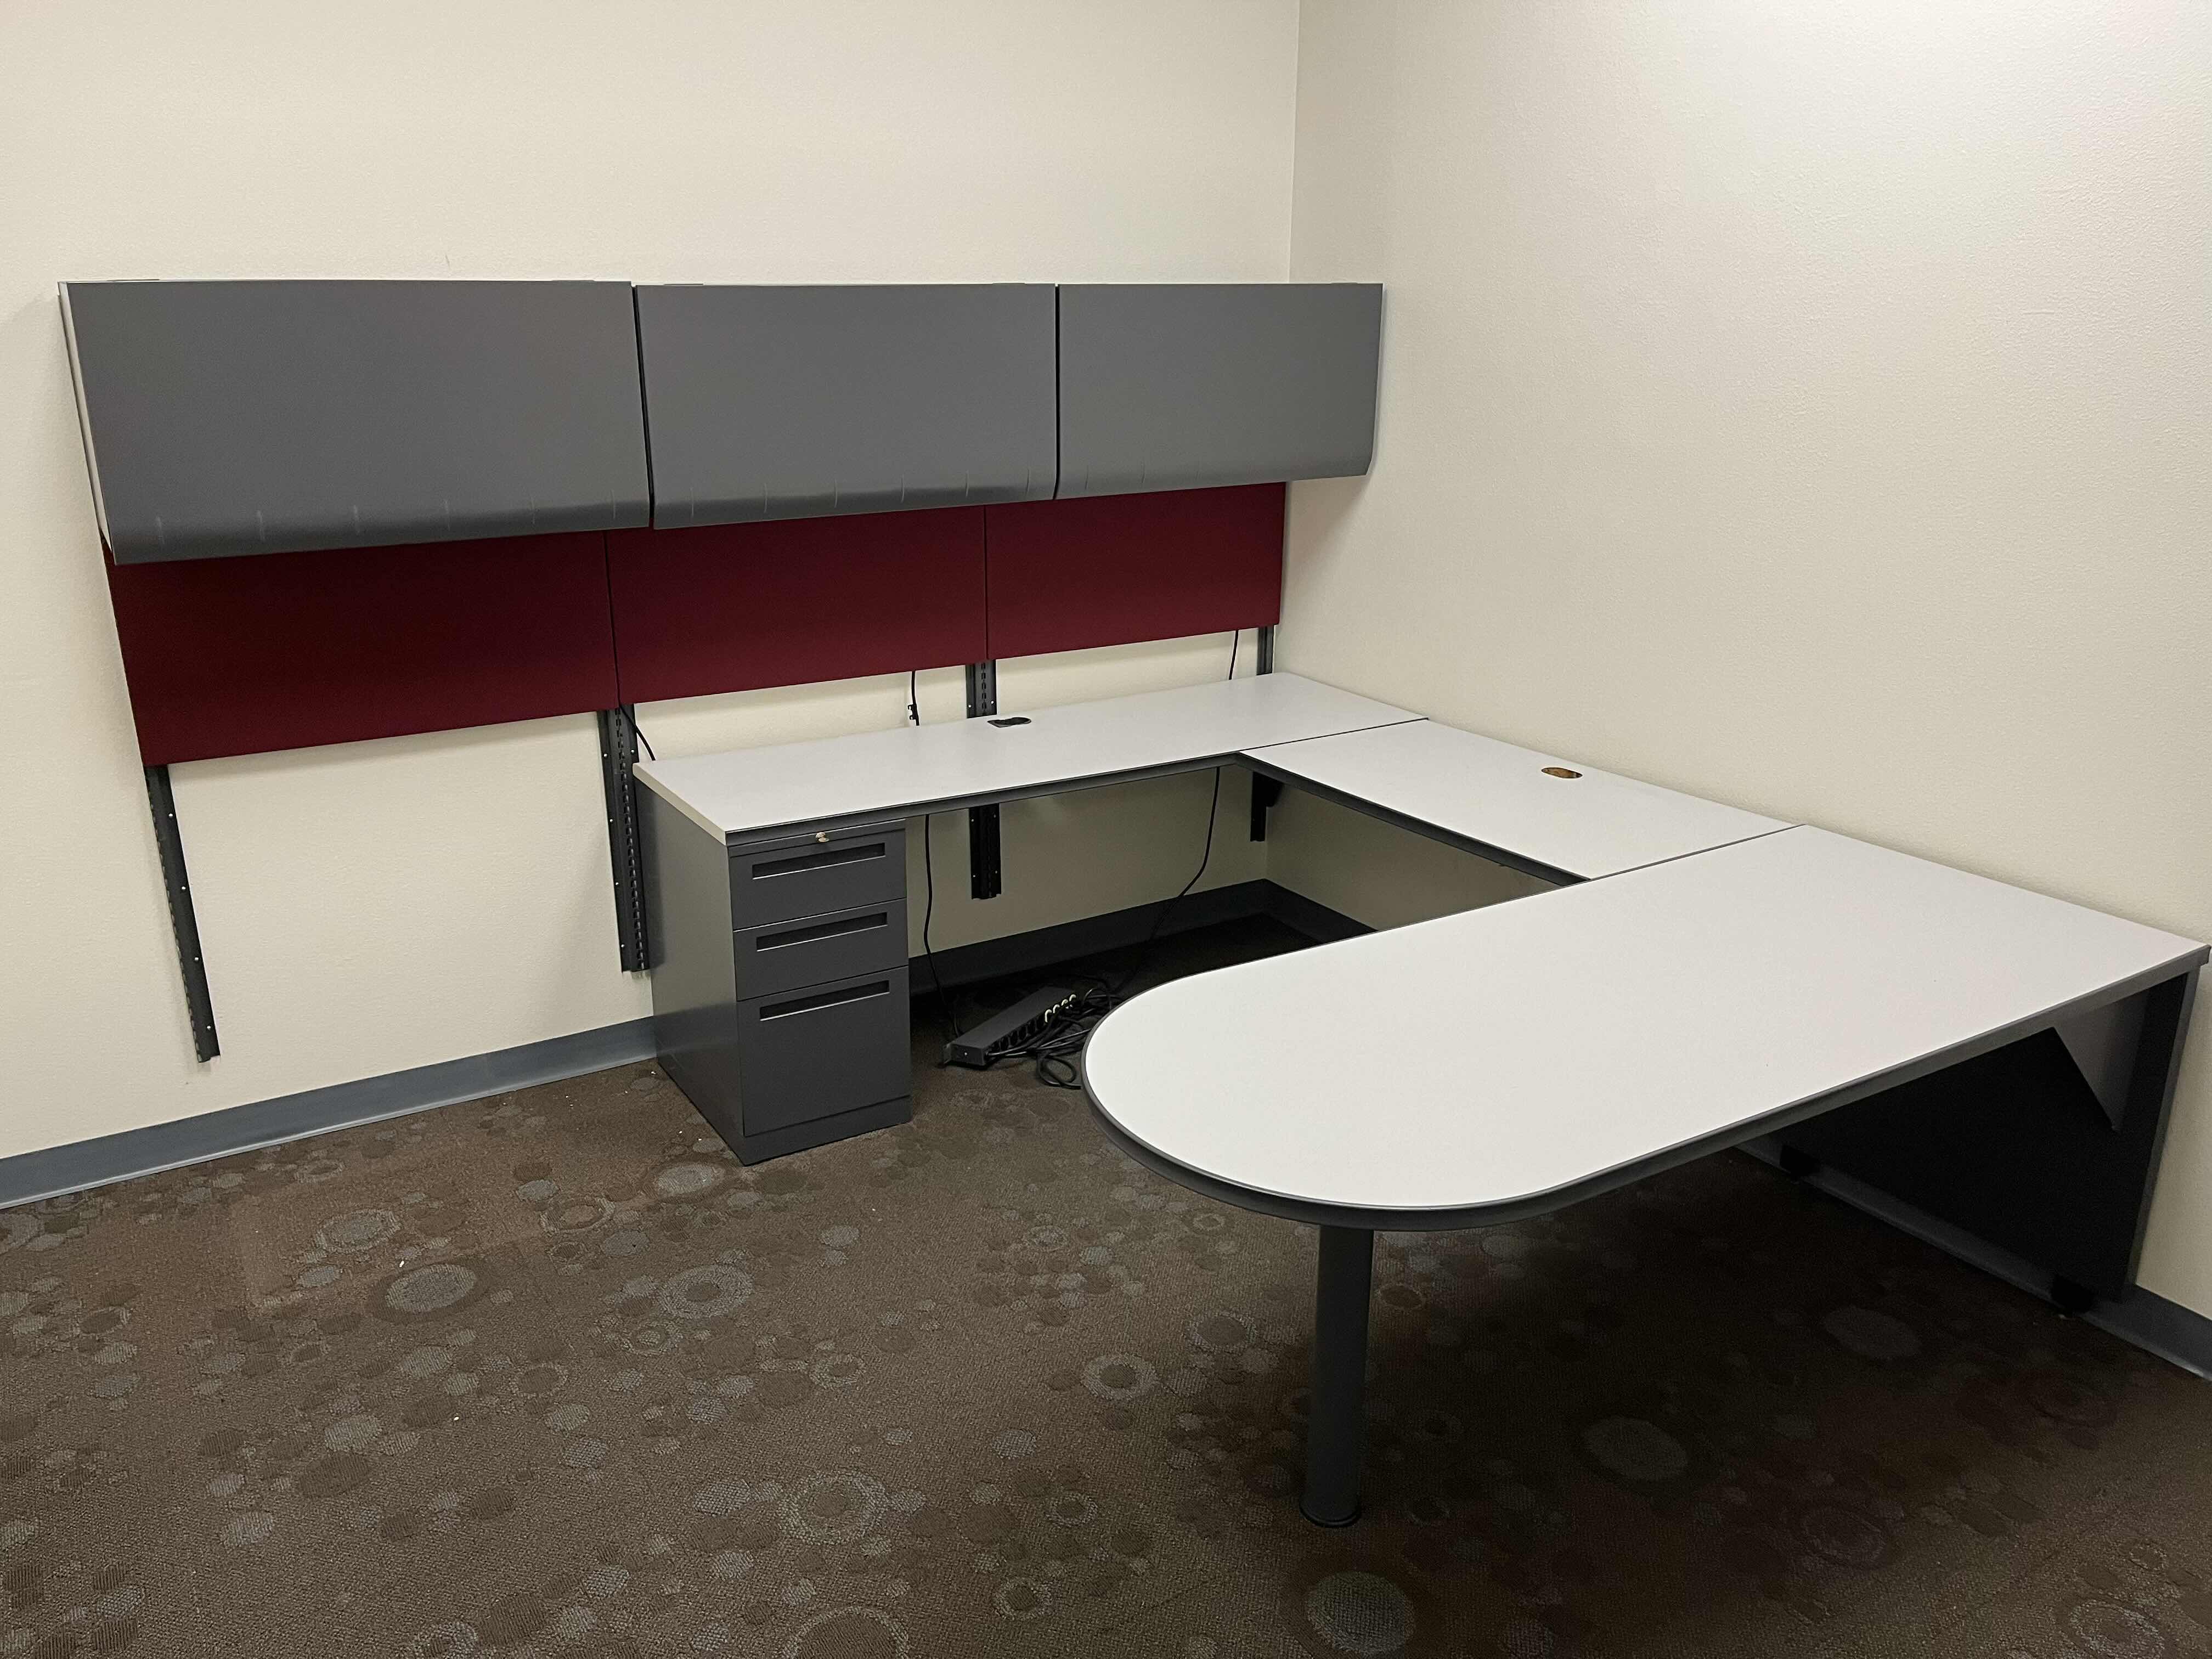 Photo 1 of ALL STEEL U SHAPE WALL MOUNTED OFFICE DESK 95” X 72” H29” & ALL STEEL WALL MOUNTED CABINETS W LIGHTS 108” X 15” H60”